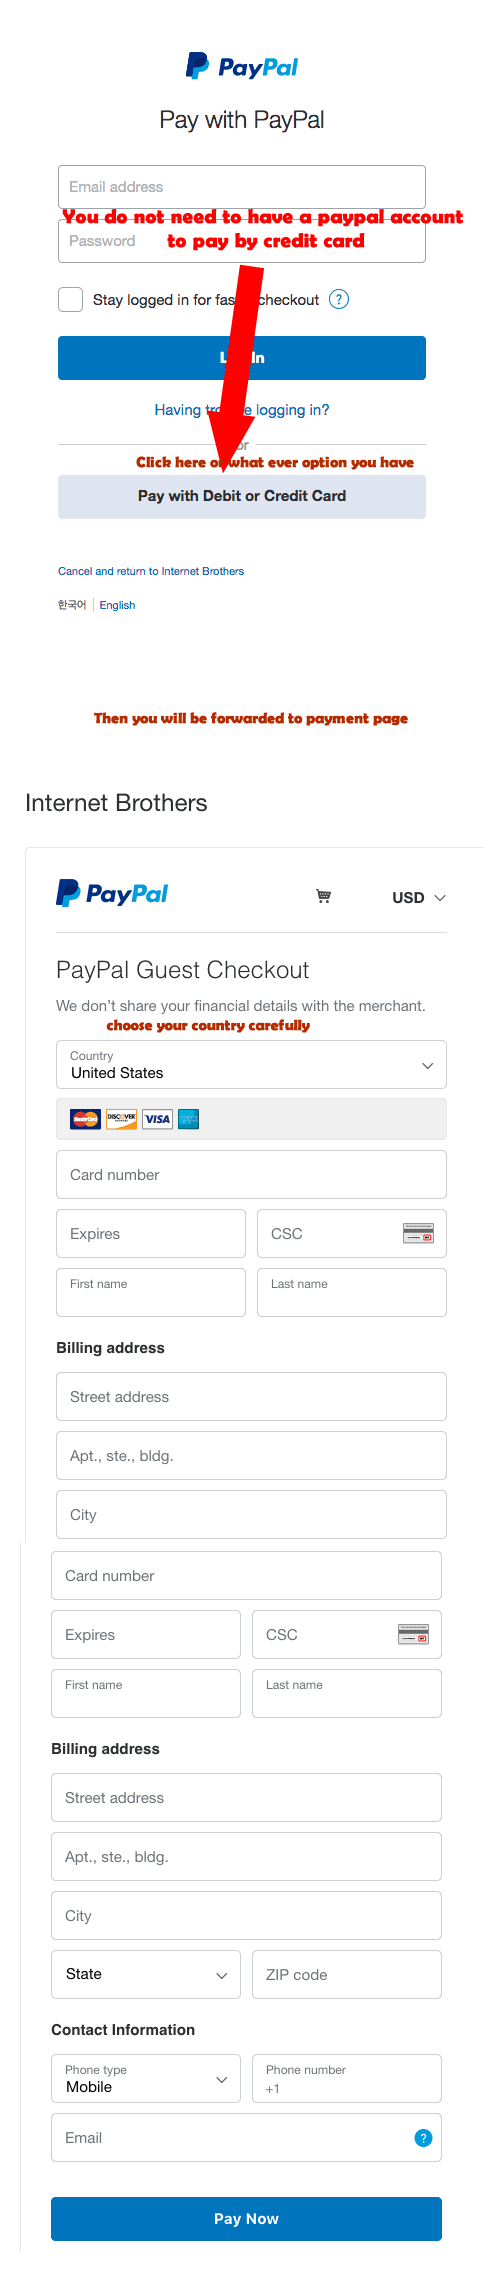 paying by credit card through paypal interface